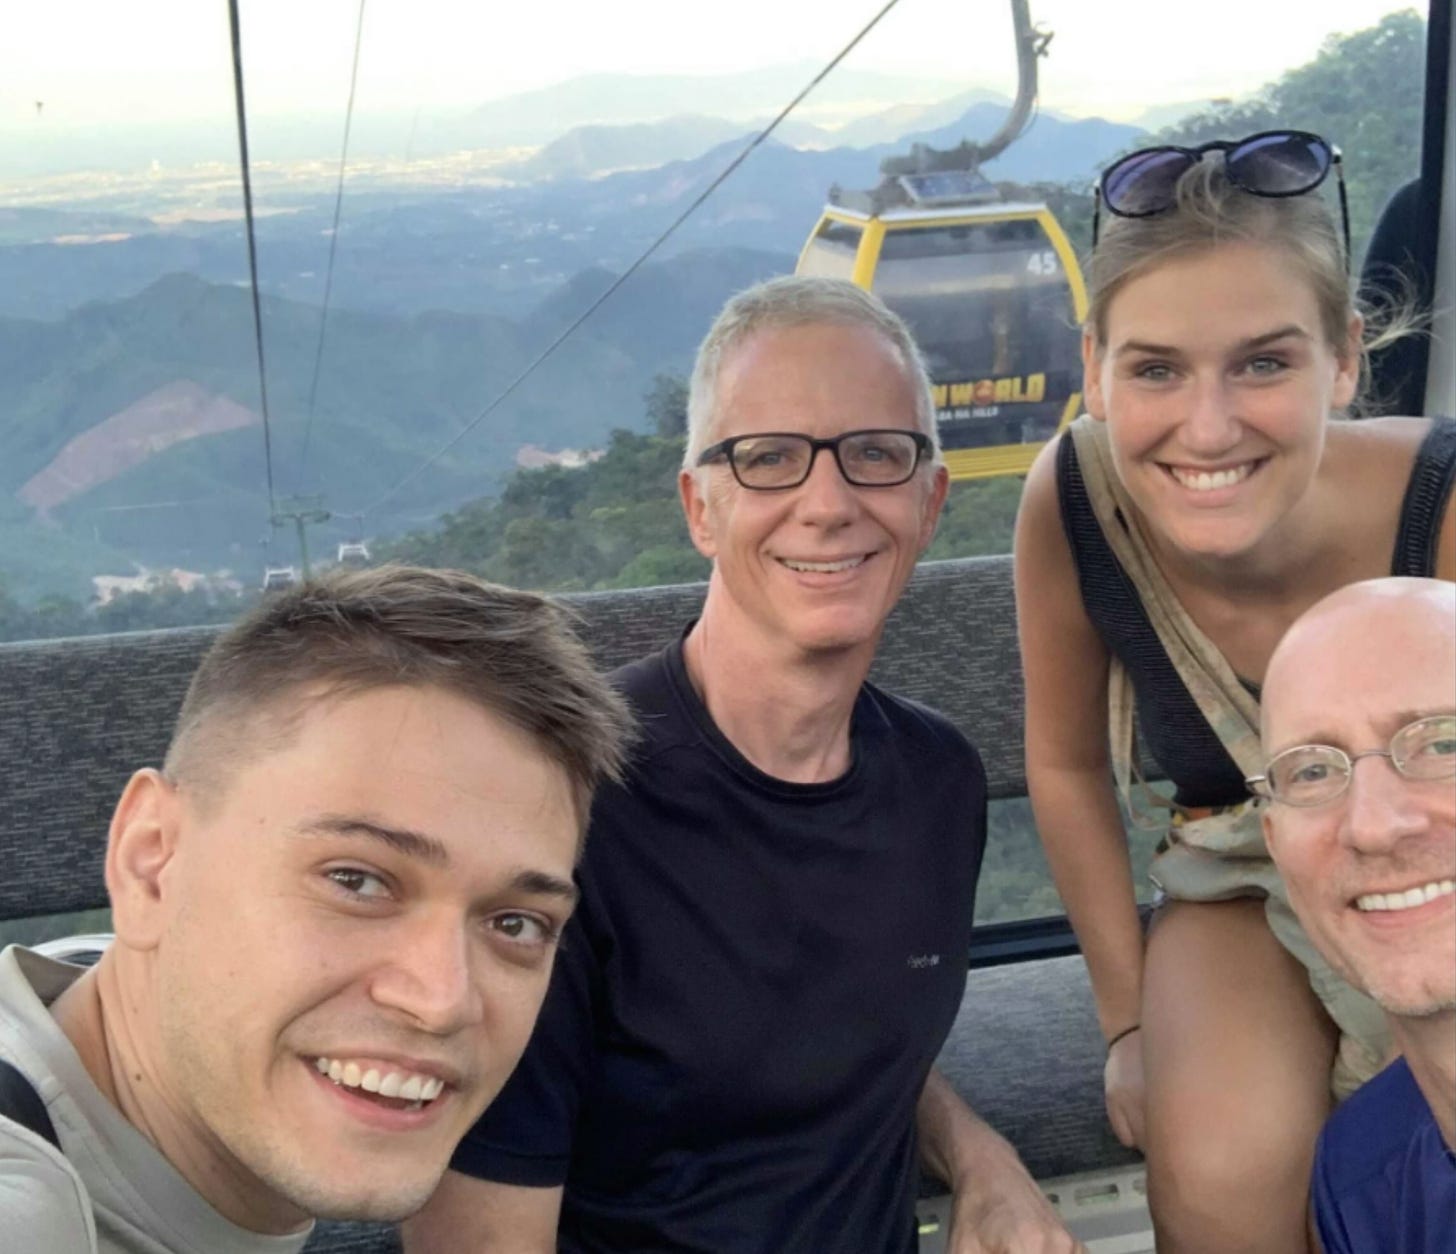 Michael, Brent, Miek, and Mike, in a cable car in the Ba Na Hills in Vietnam.